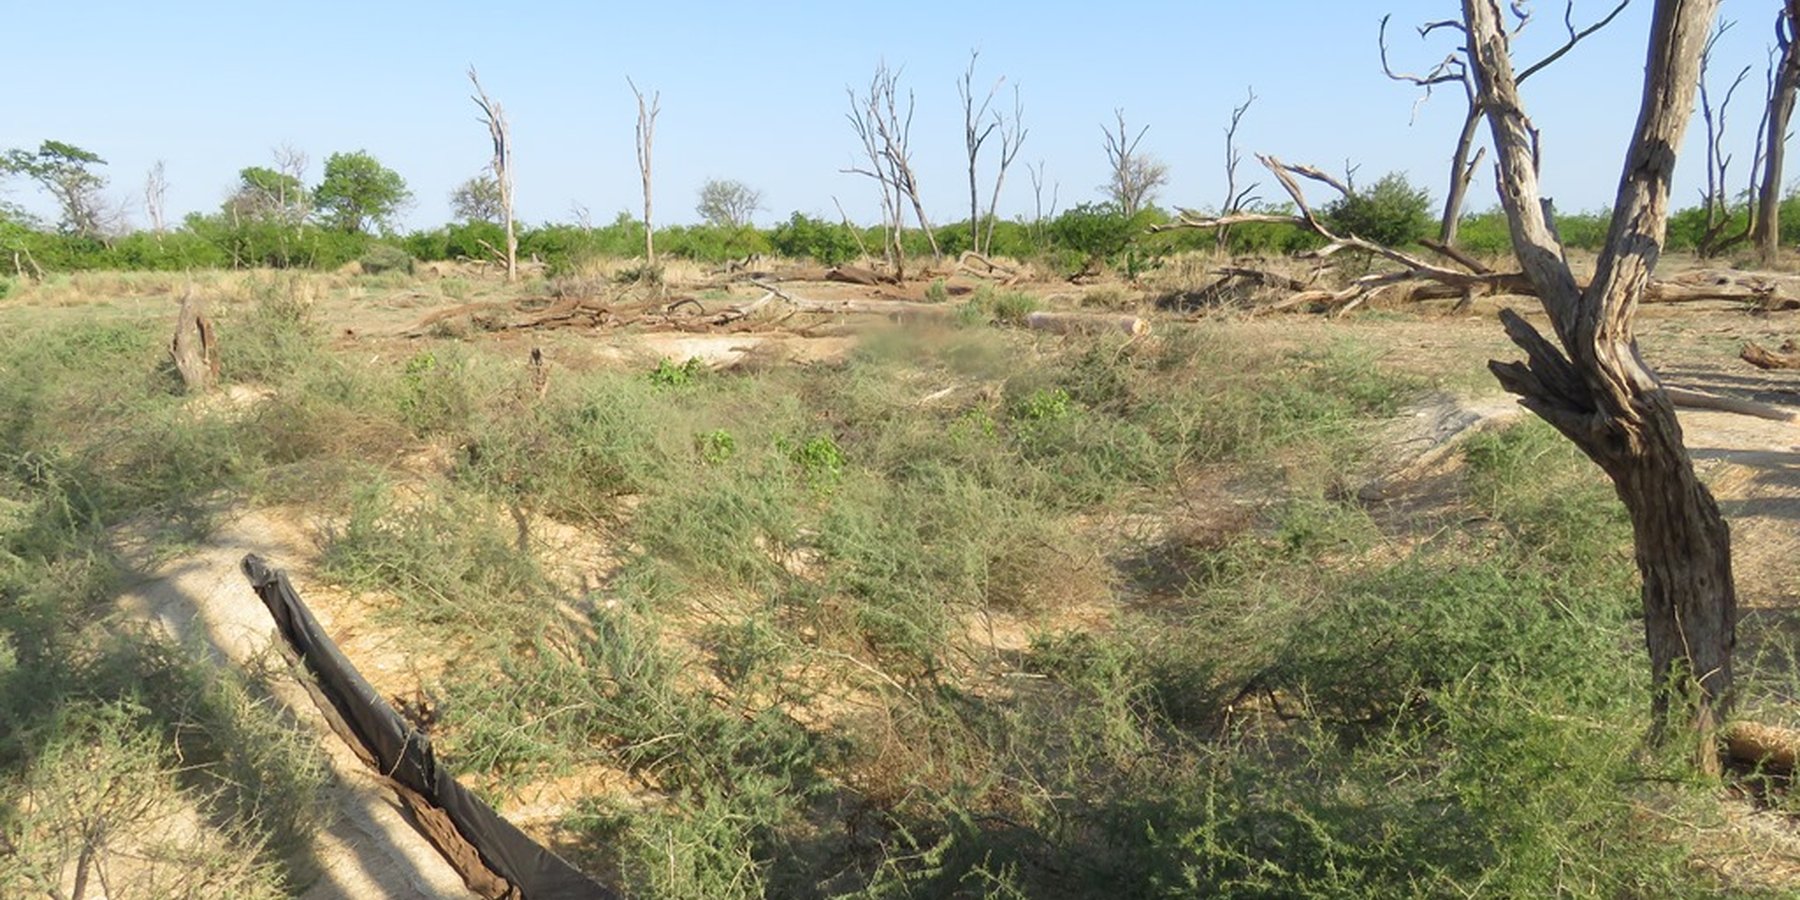 Rehabilitation of gully erosion in the Mapungubwe National Park in South Africa